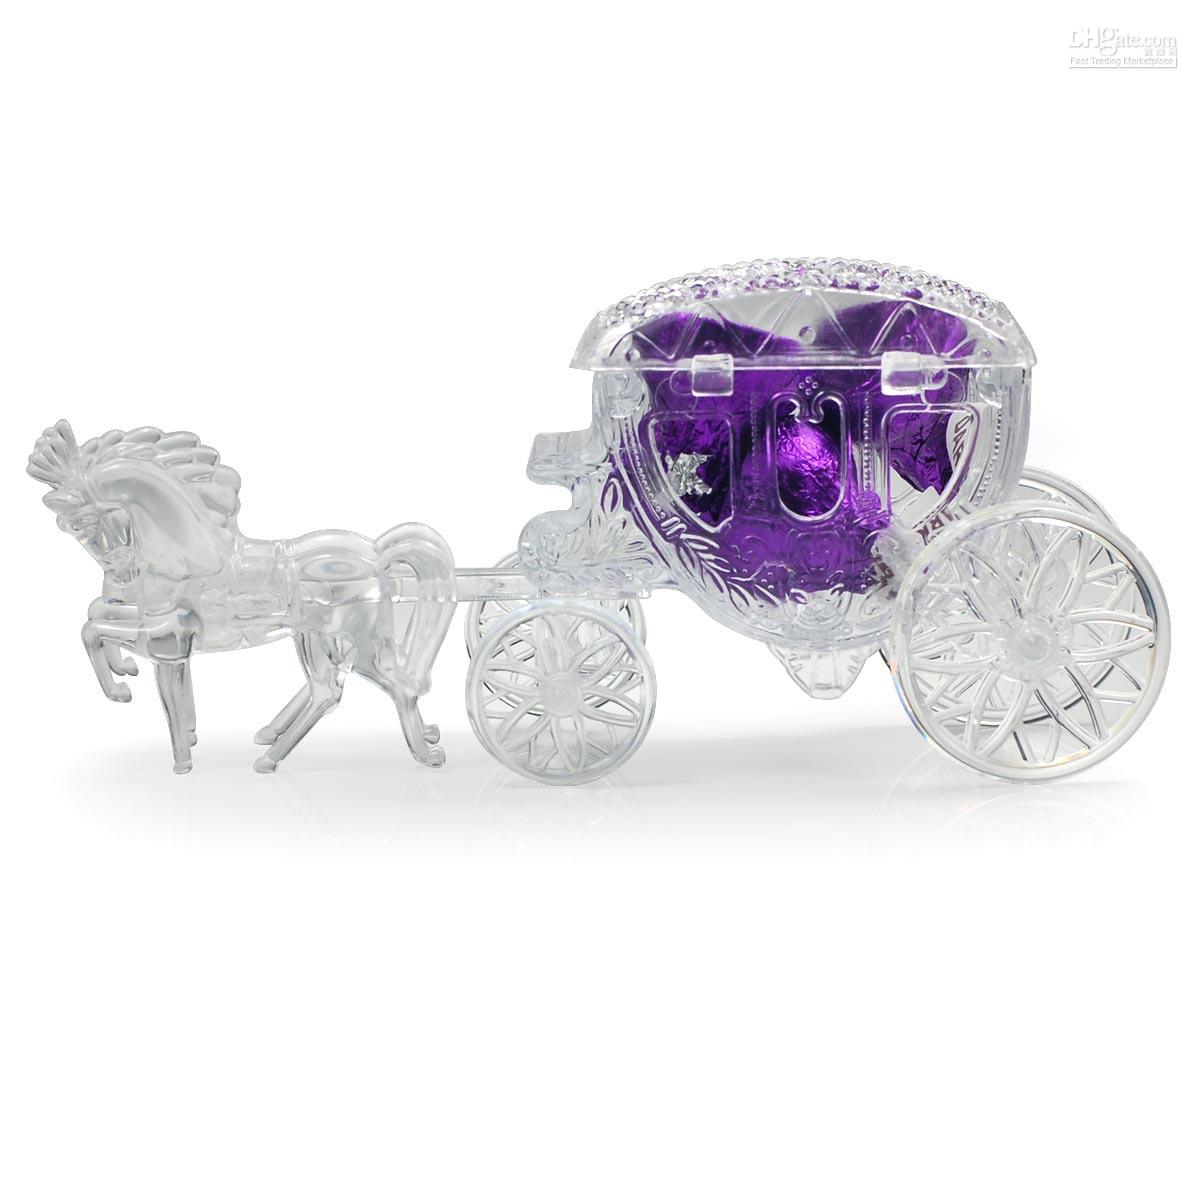 2013 crystal fairy tale carriage candy boxes